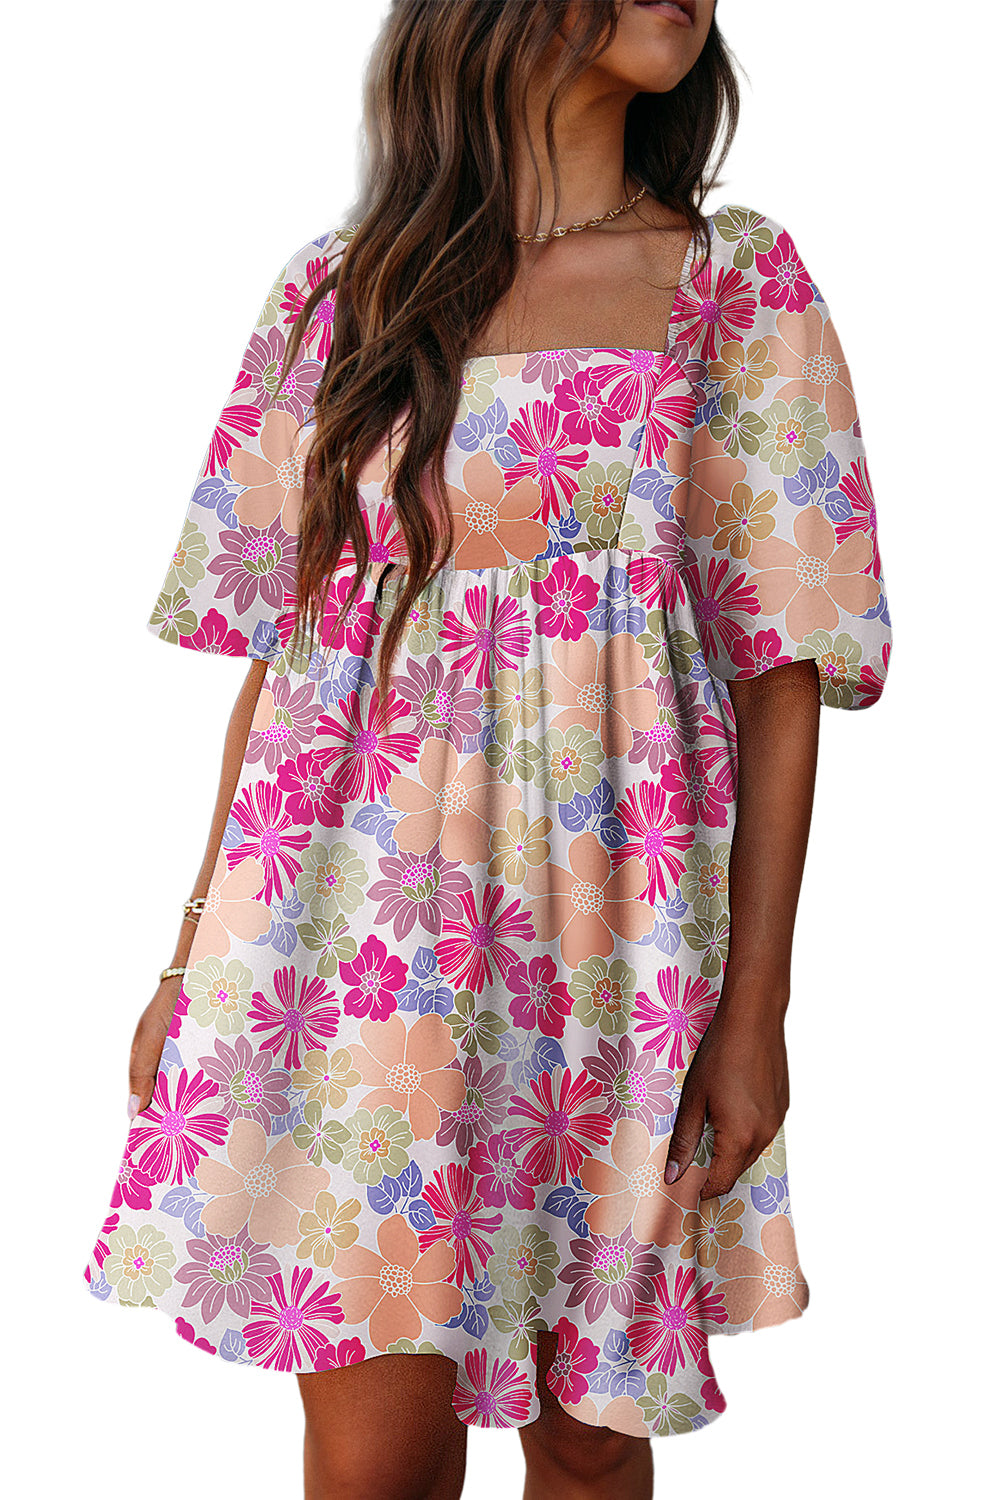 Blue Zone Planet |  Rose Summer Floral Square Neck Puff Sleeve Babydoll Dress Blue Zone Planet